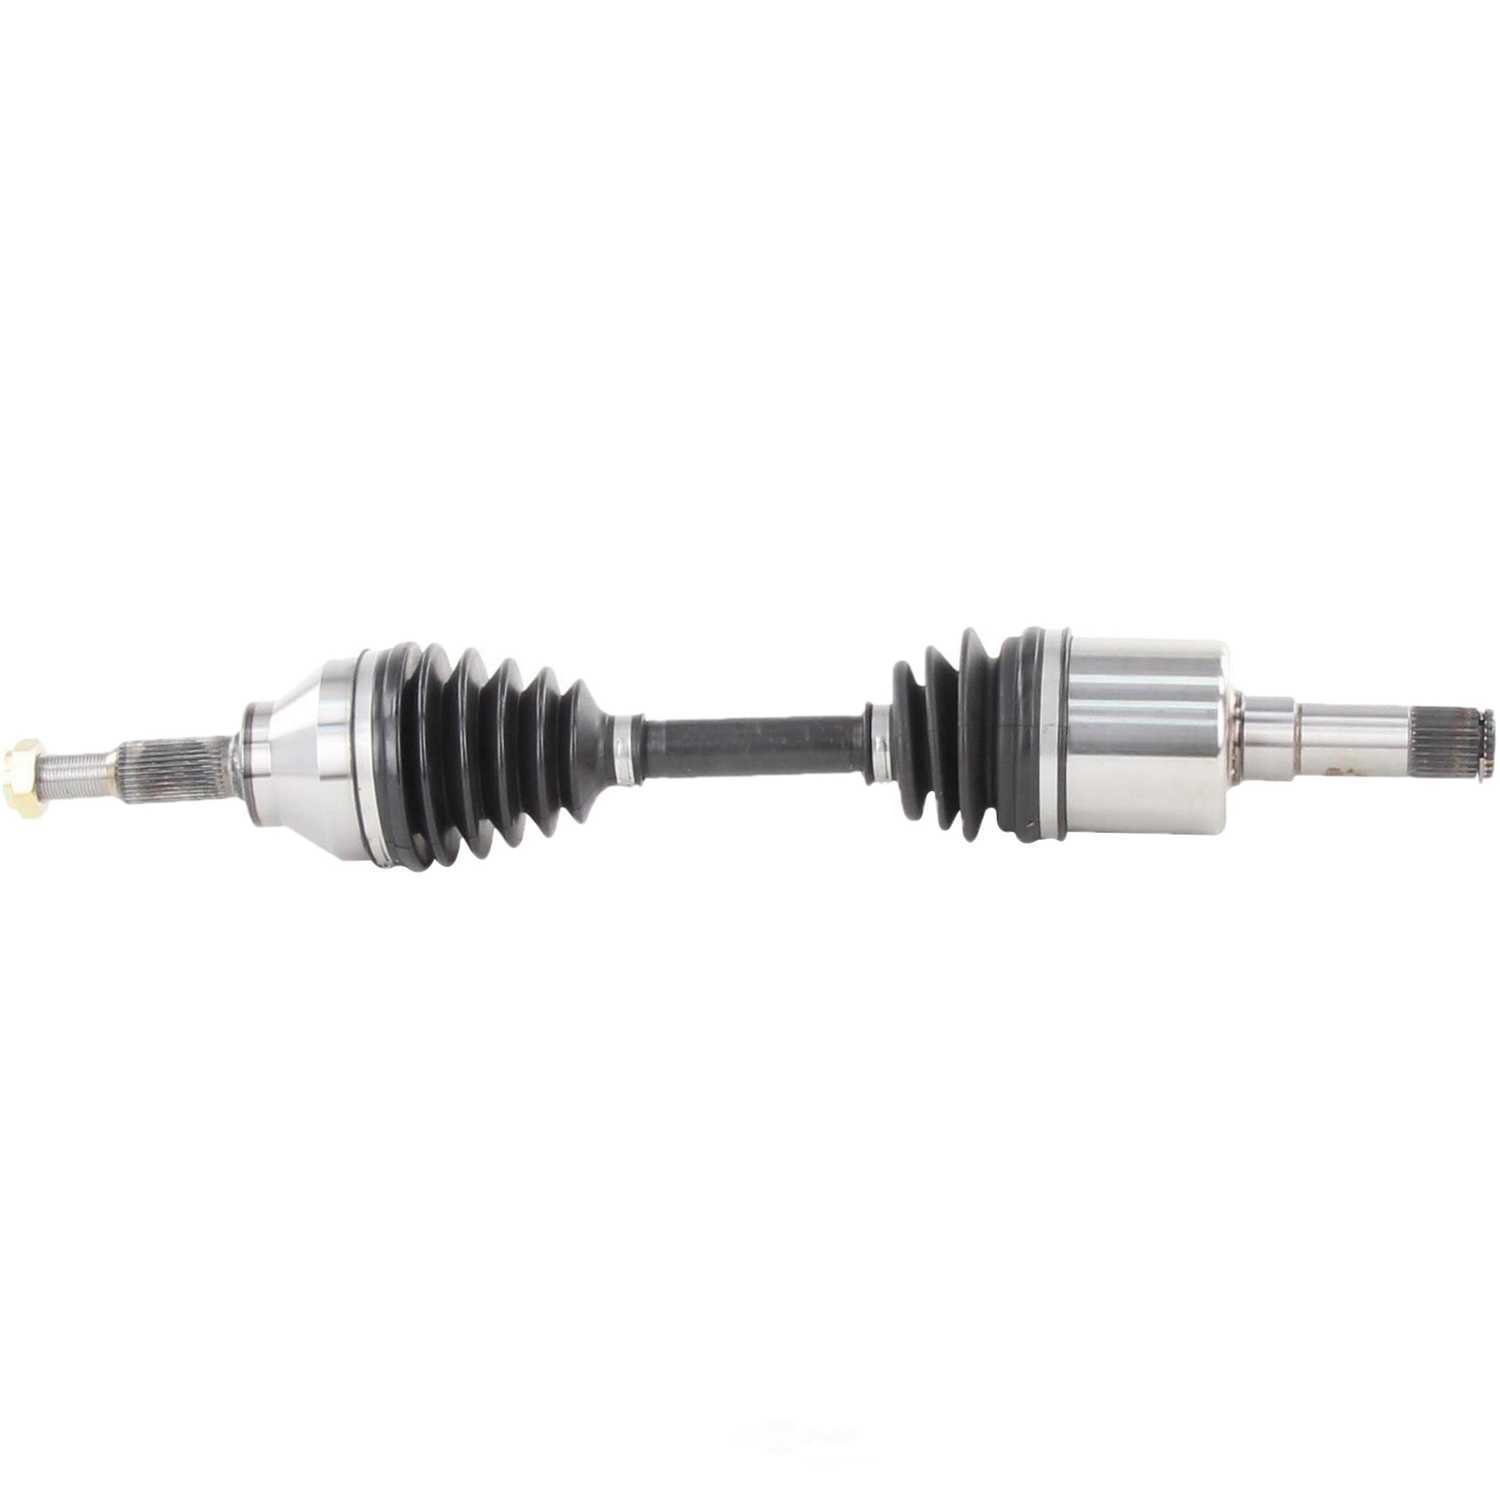 FRONT RIGHT CV Axle Shaft For SATURN ION 05-07 L4 2.0L Manual Transmission 